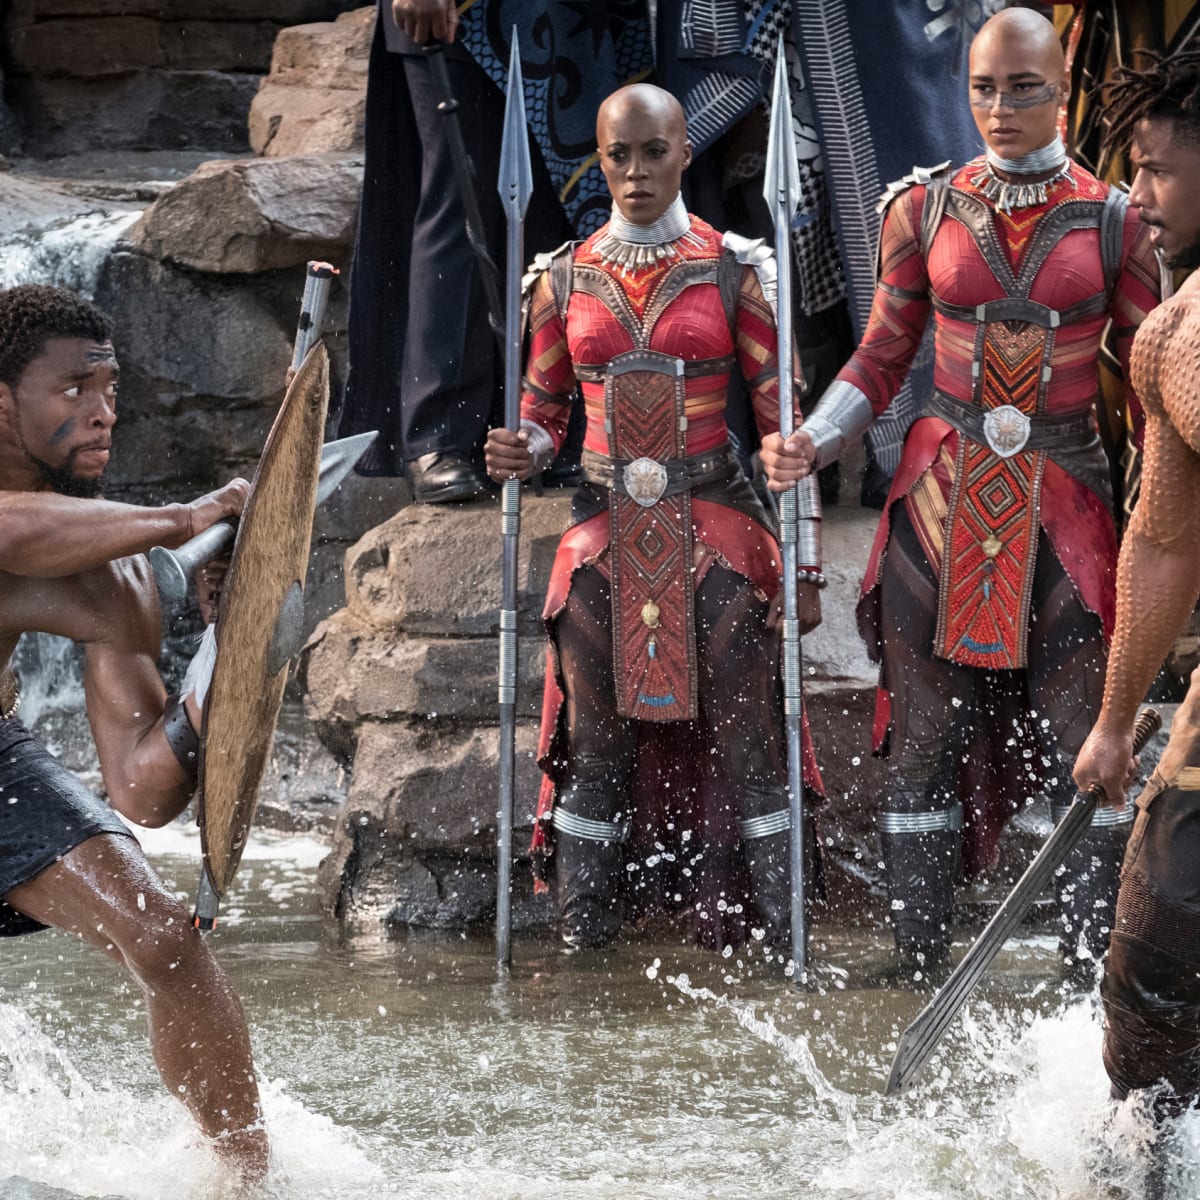 The Costume, Hair and Makeup in Marvel's 'Black Panther' are a Celebration  of Black Culture and Heritage - Fashionista